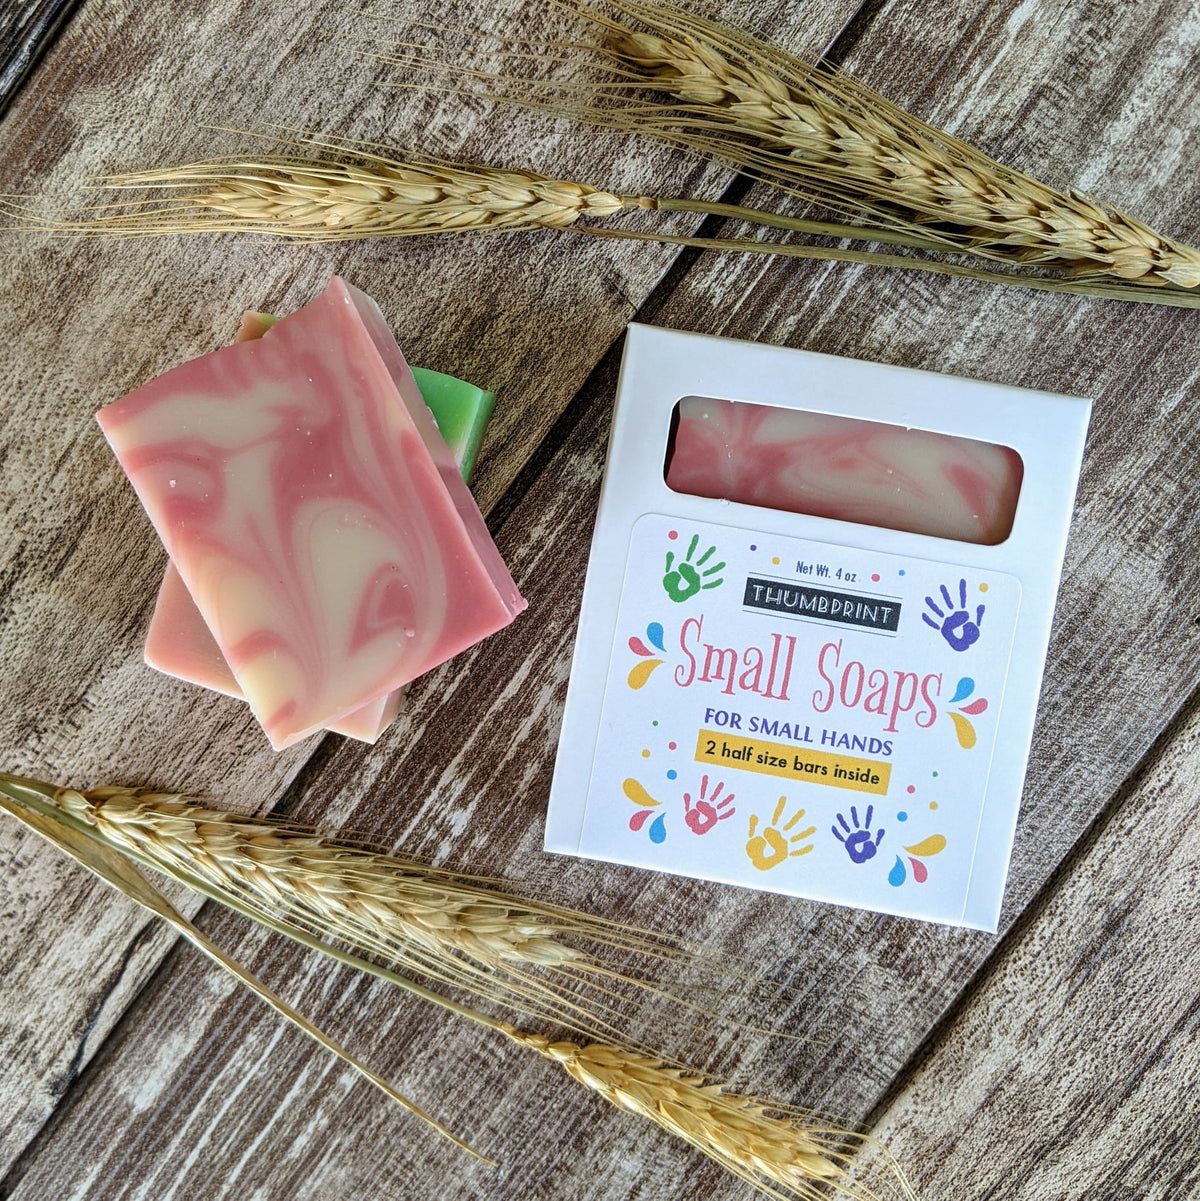 Small Soaps For Small Hands - Fruit Punch &amp; Watermelon Taffy scents